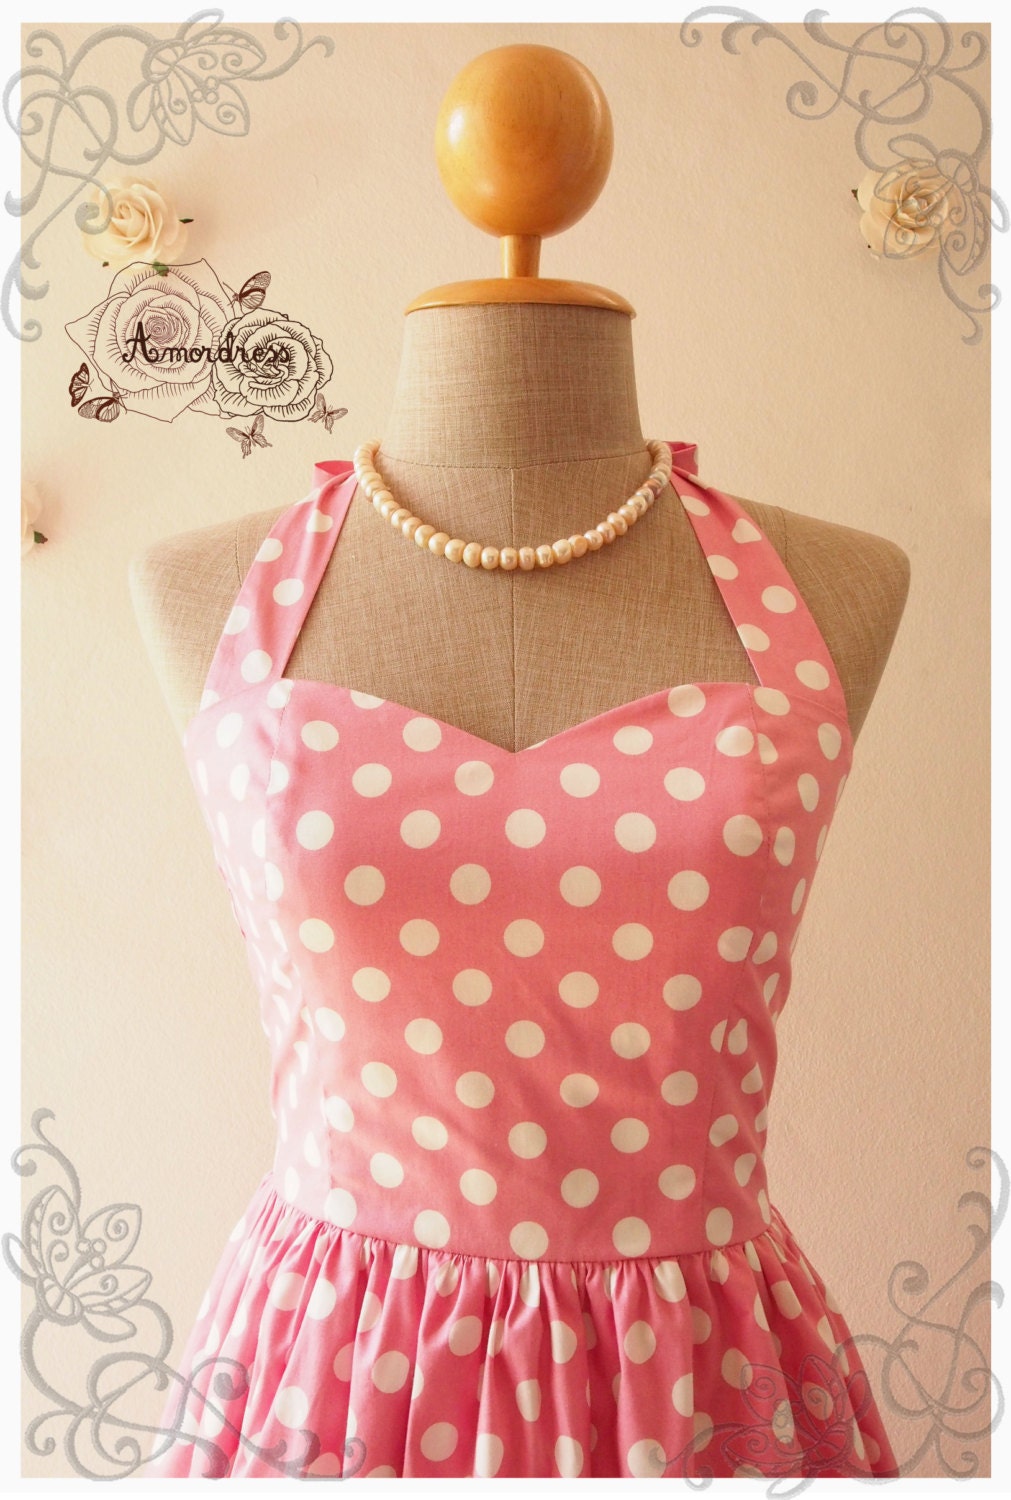 PRETTY IN PINK : Pink dress pink summer dress vintage by Amordress